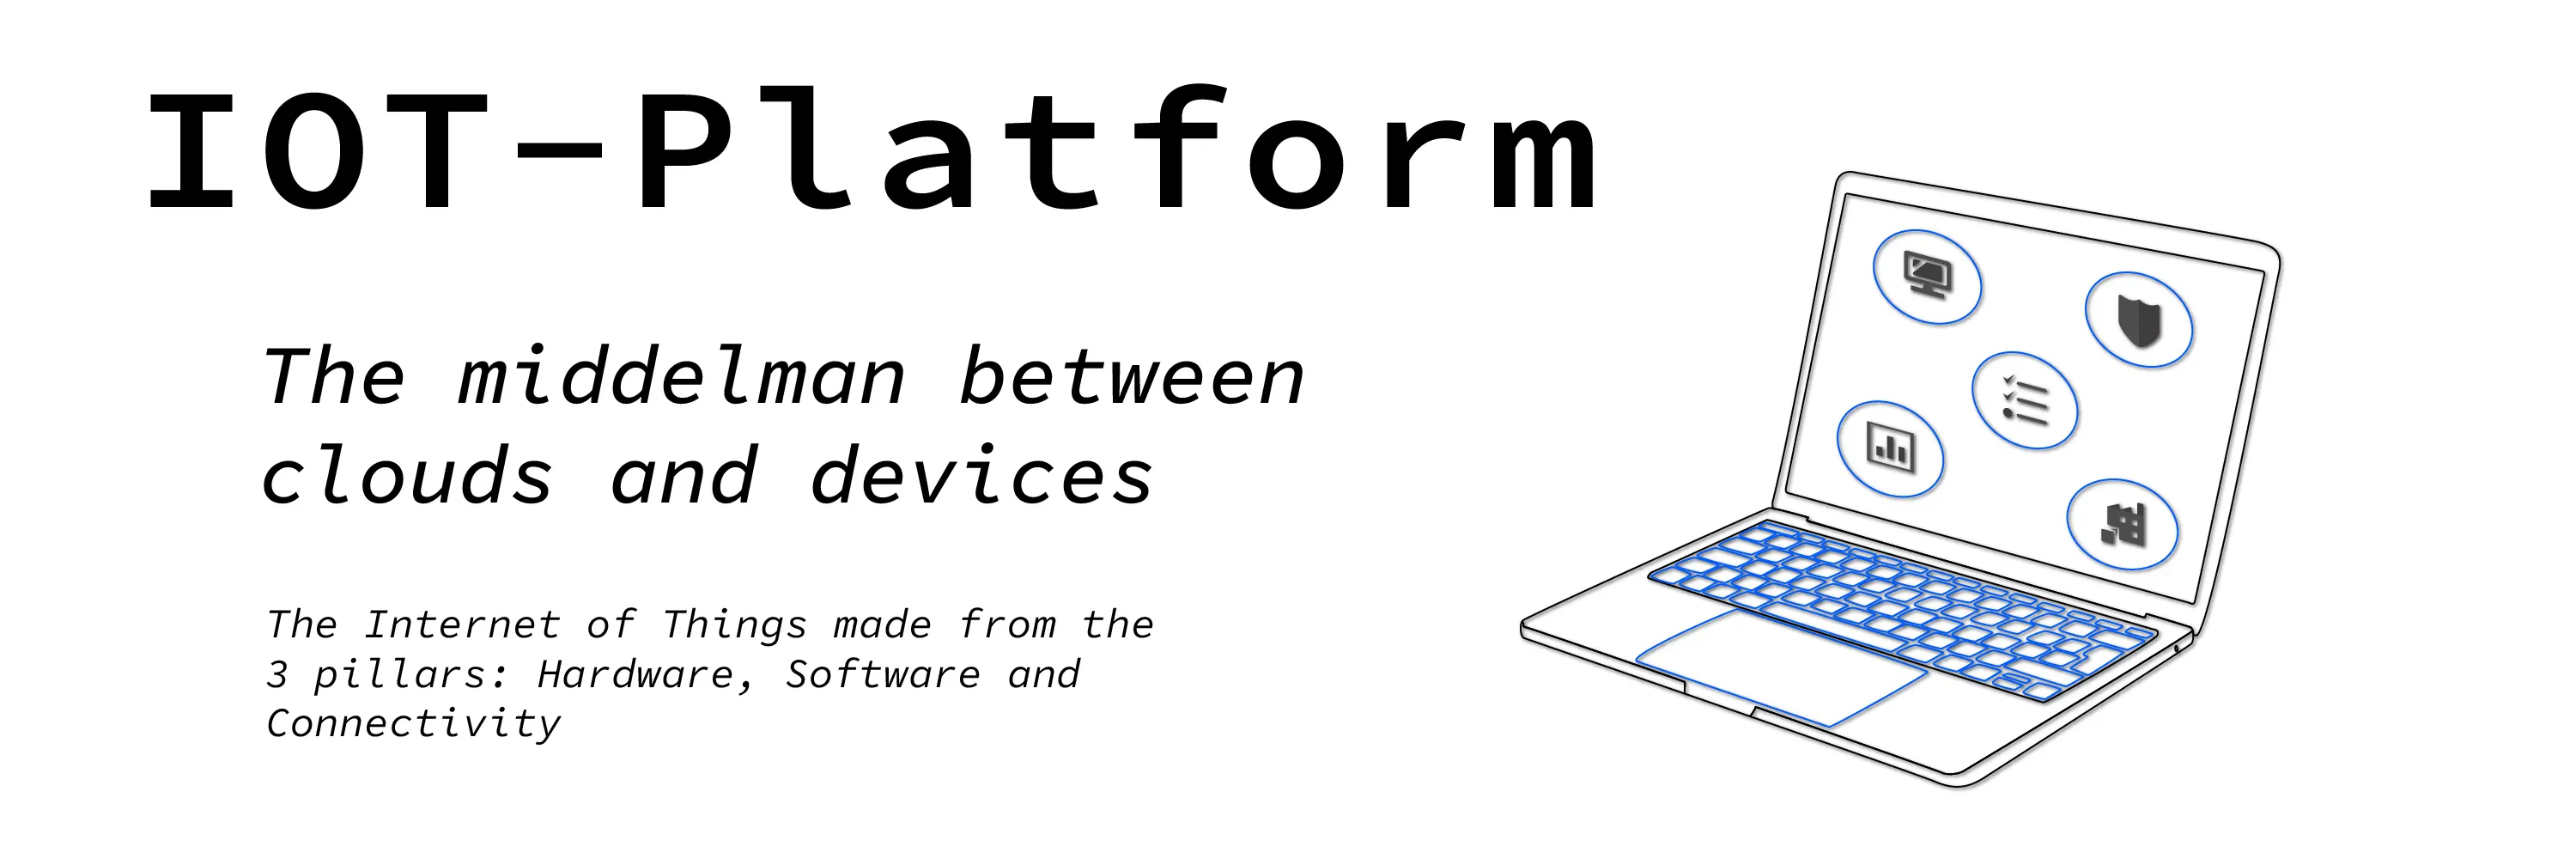 the meaning of iot platform easily explained